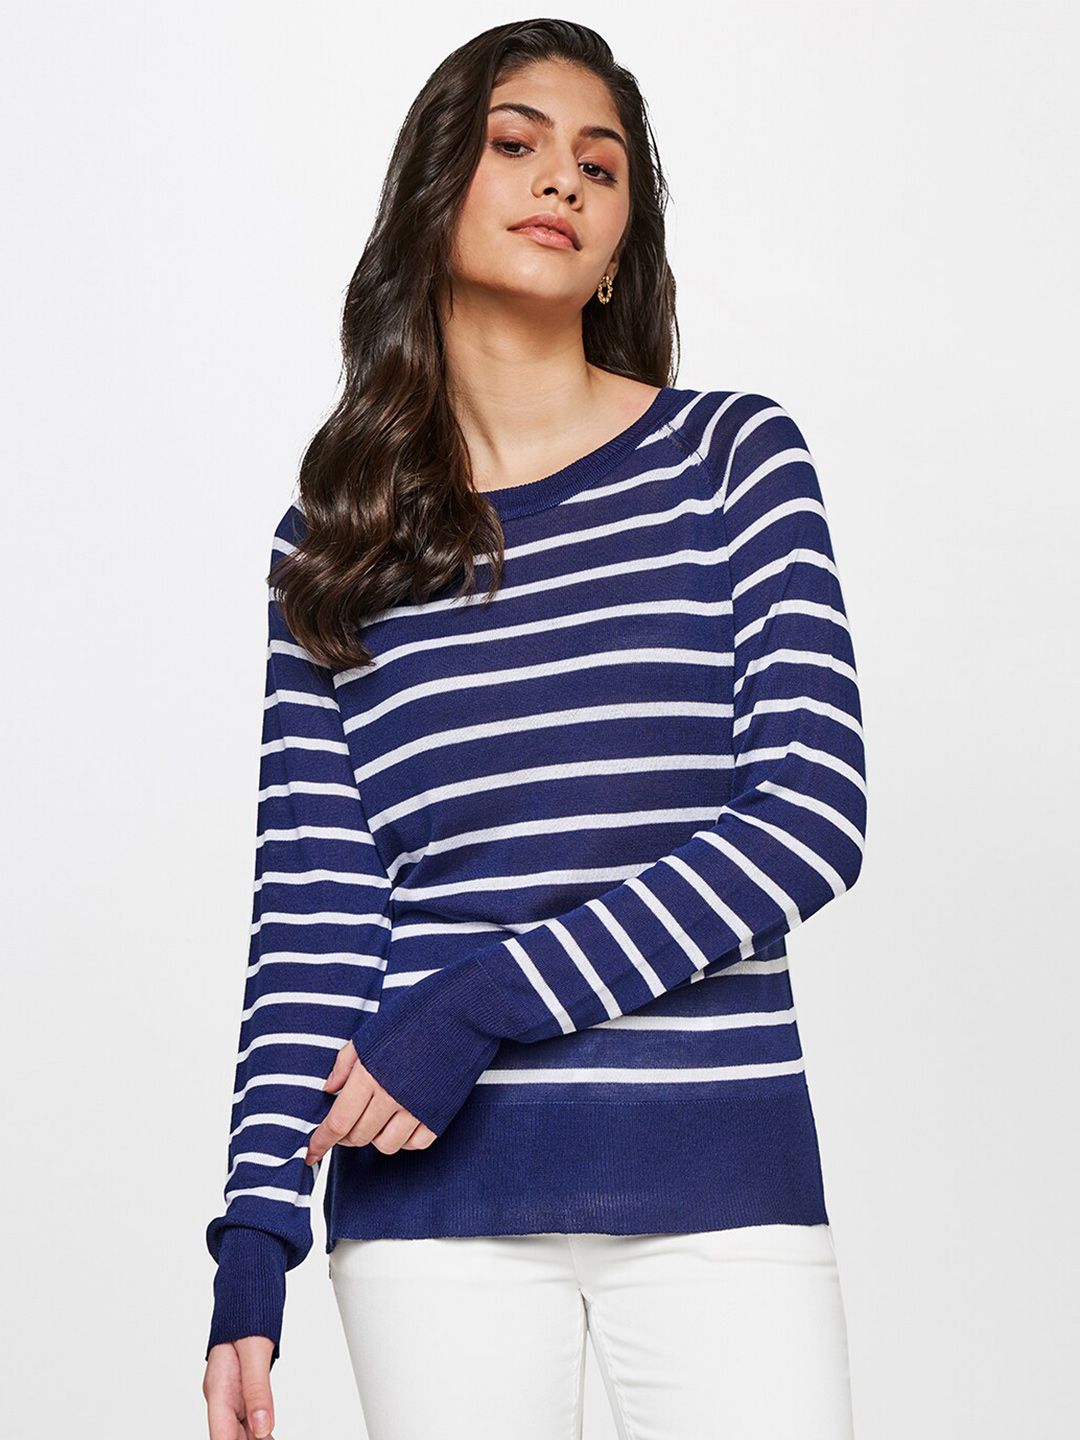 AND Women Blue & White Striped Top Price in India